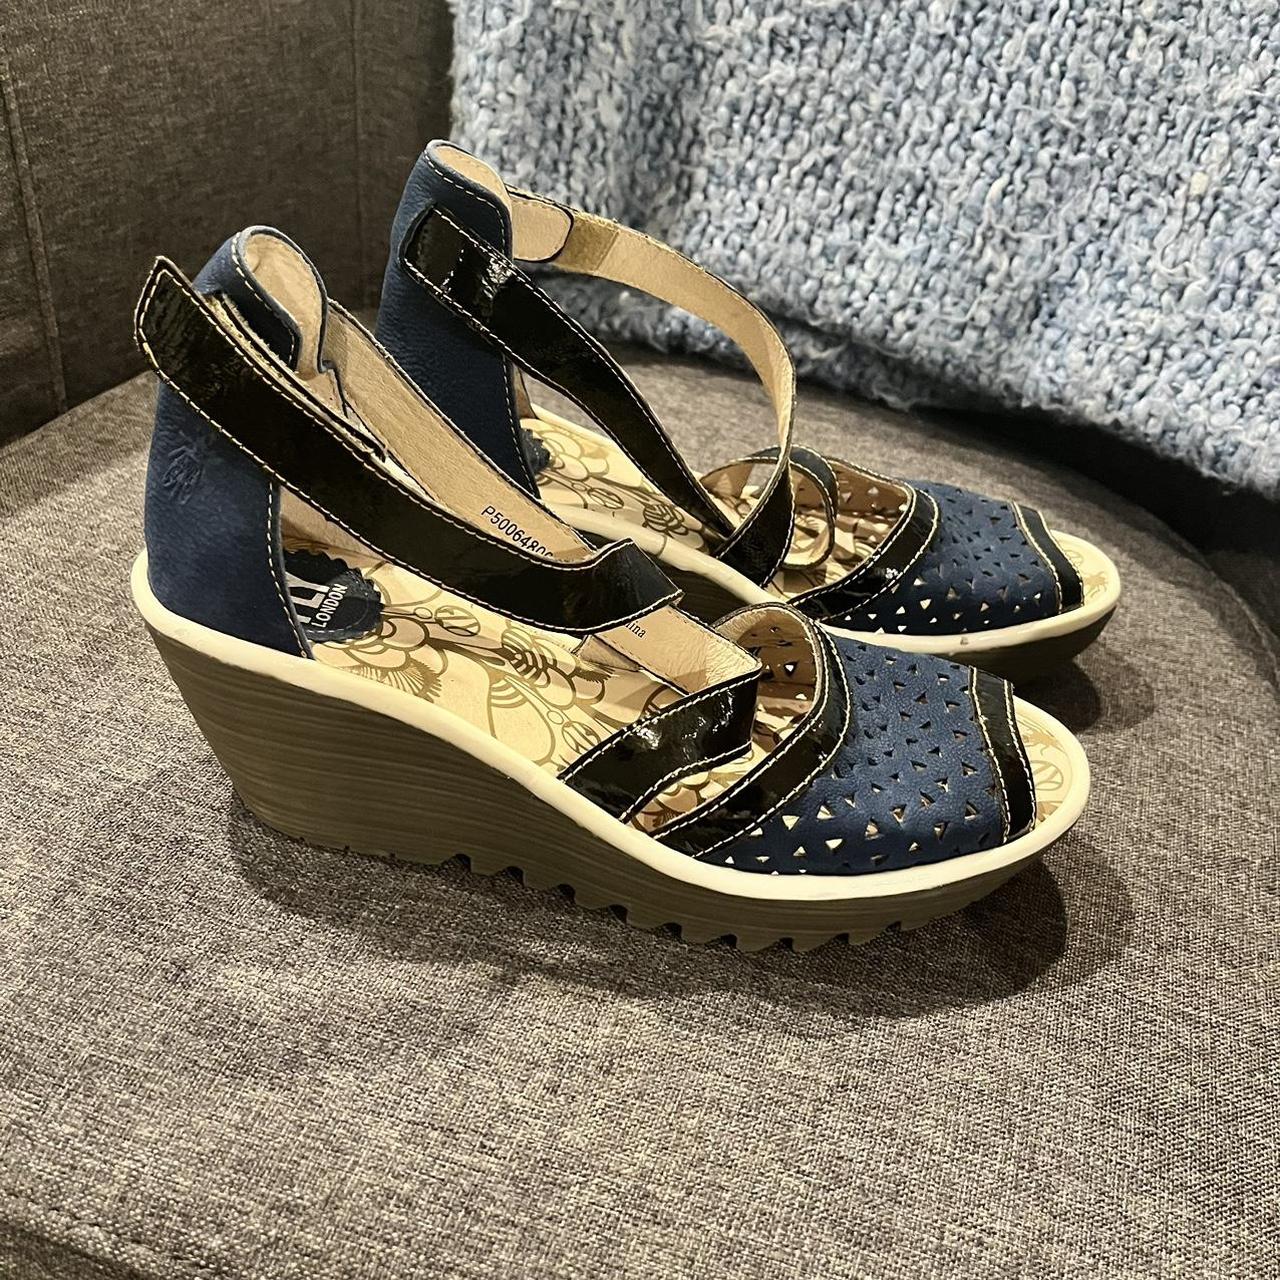 Fly London Women's Black and Navy Sandals